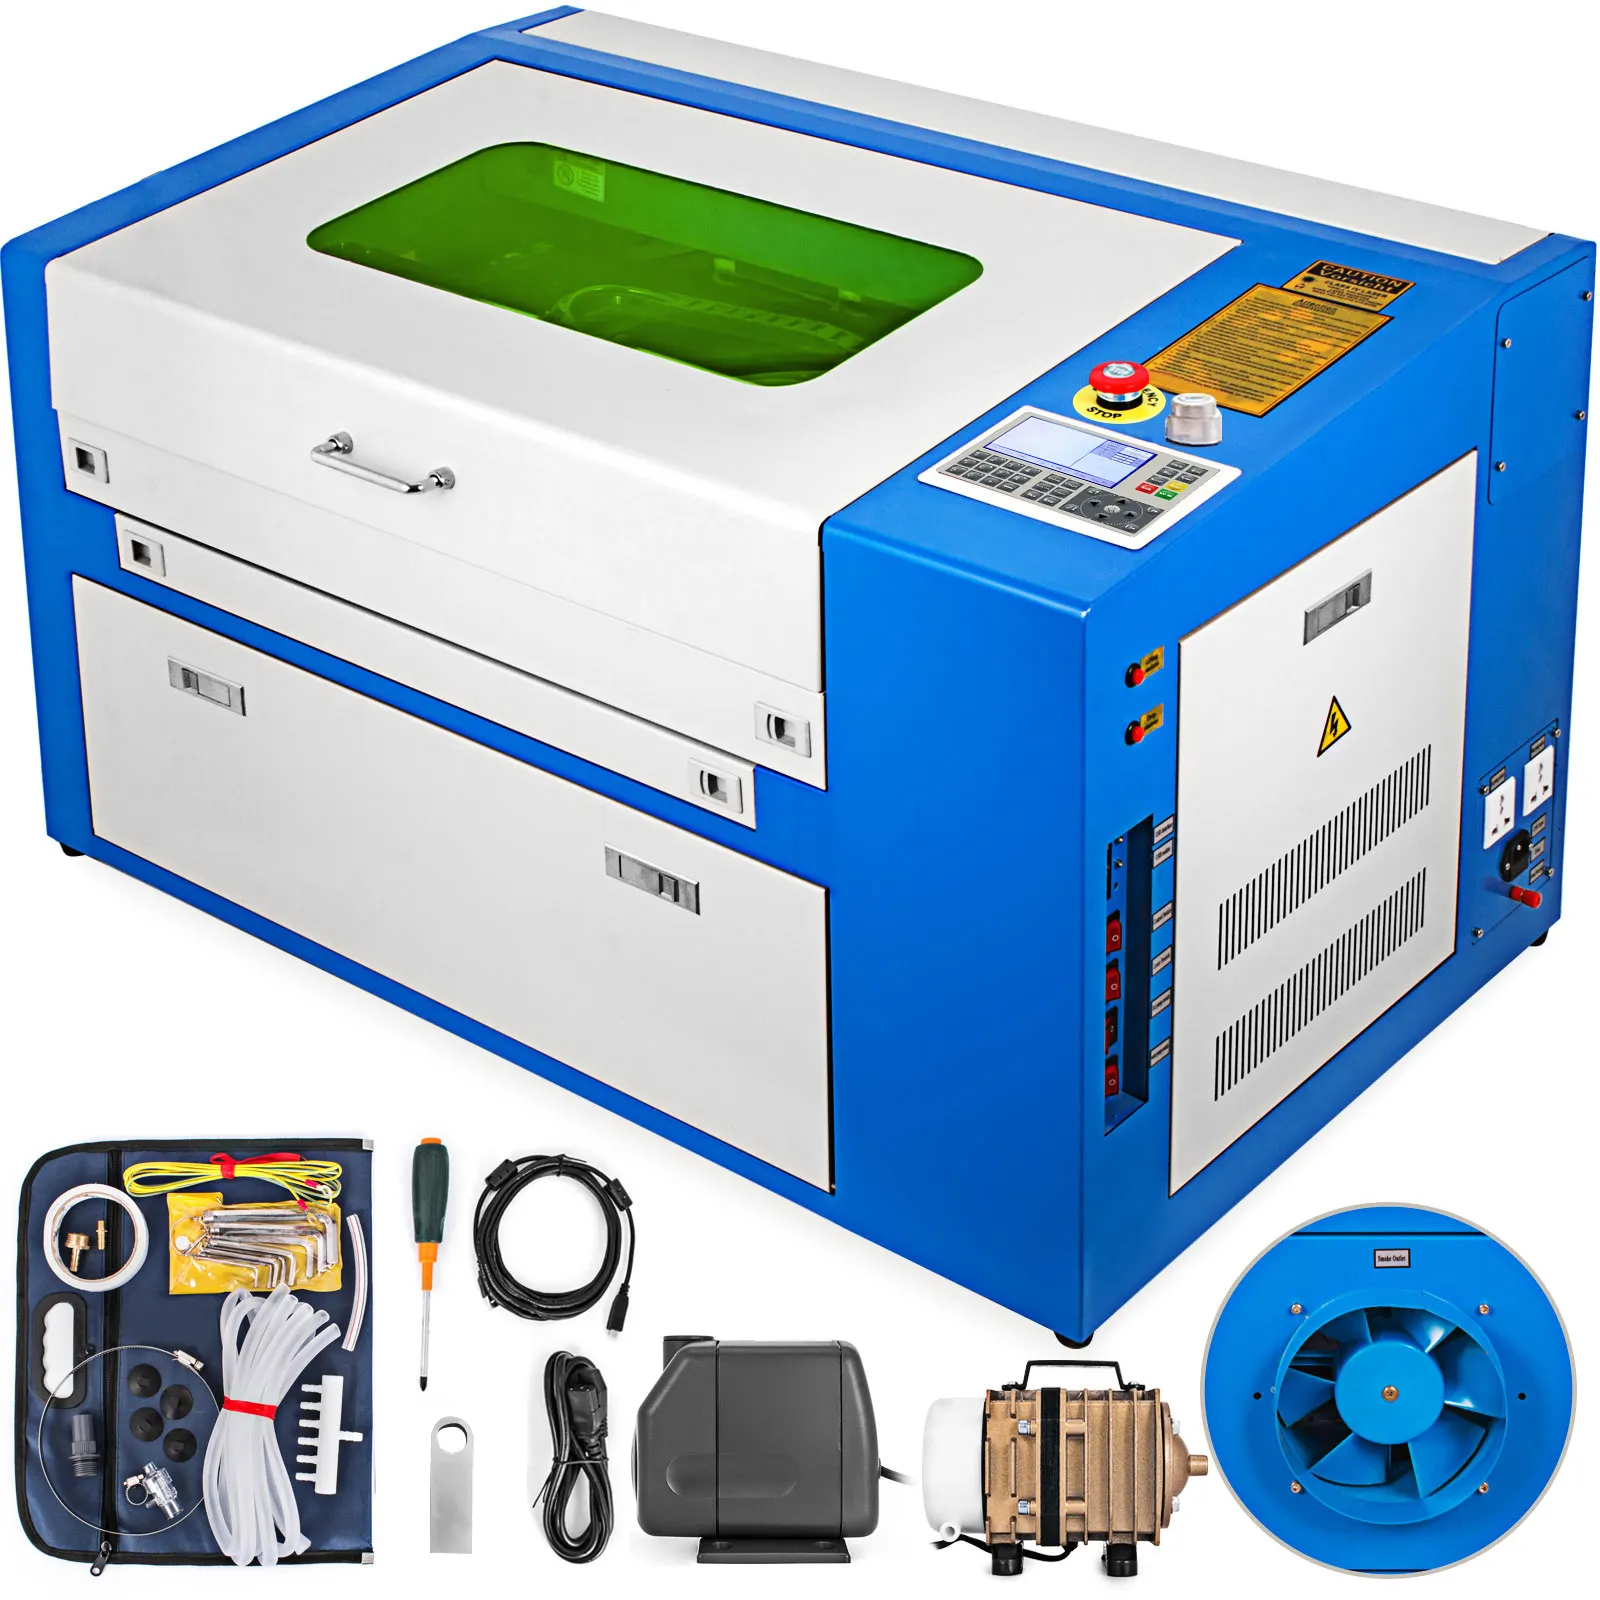 PEIXU 3050 Laser Engraving and Cutting Machine New Arrival for Art Jewelry and Paper Cuttings